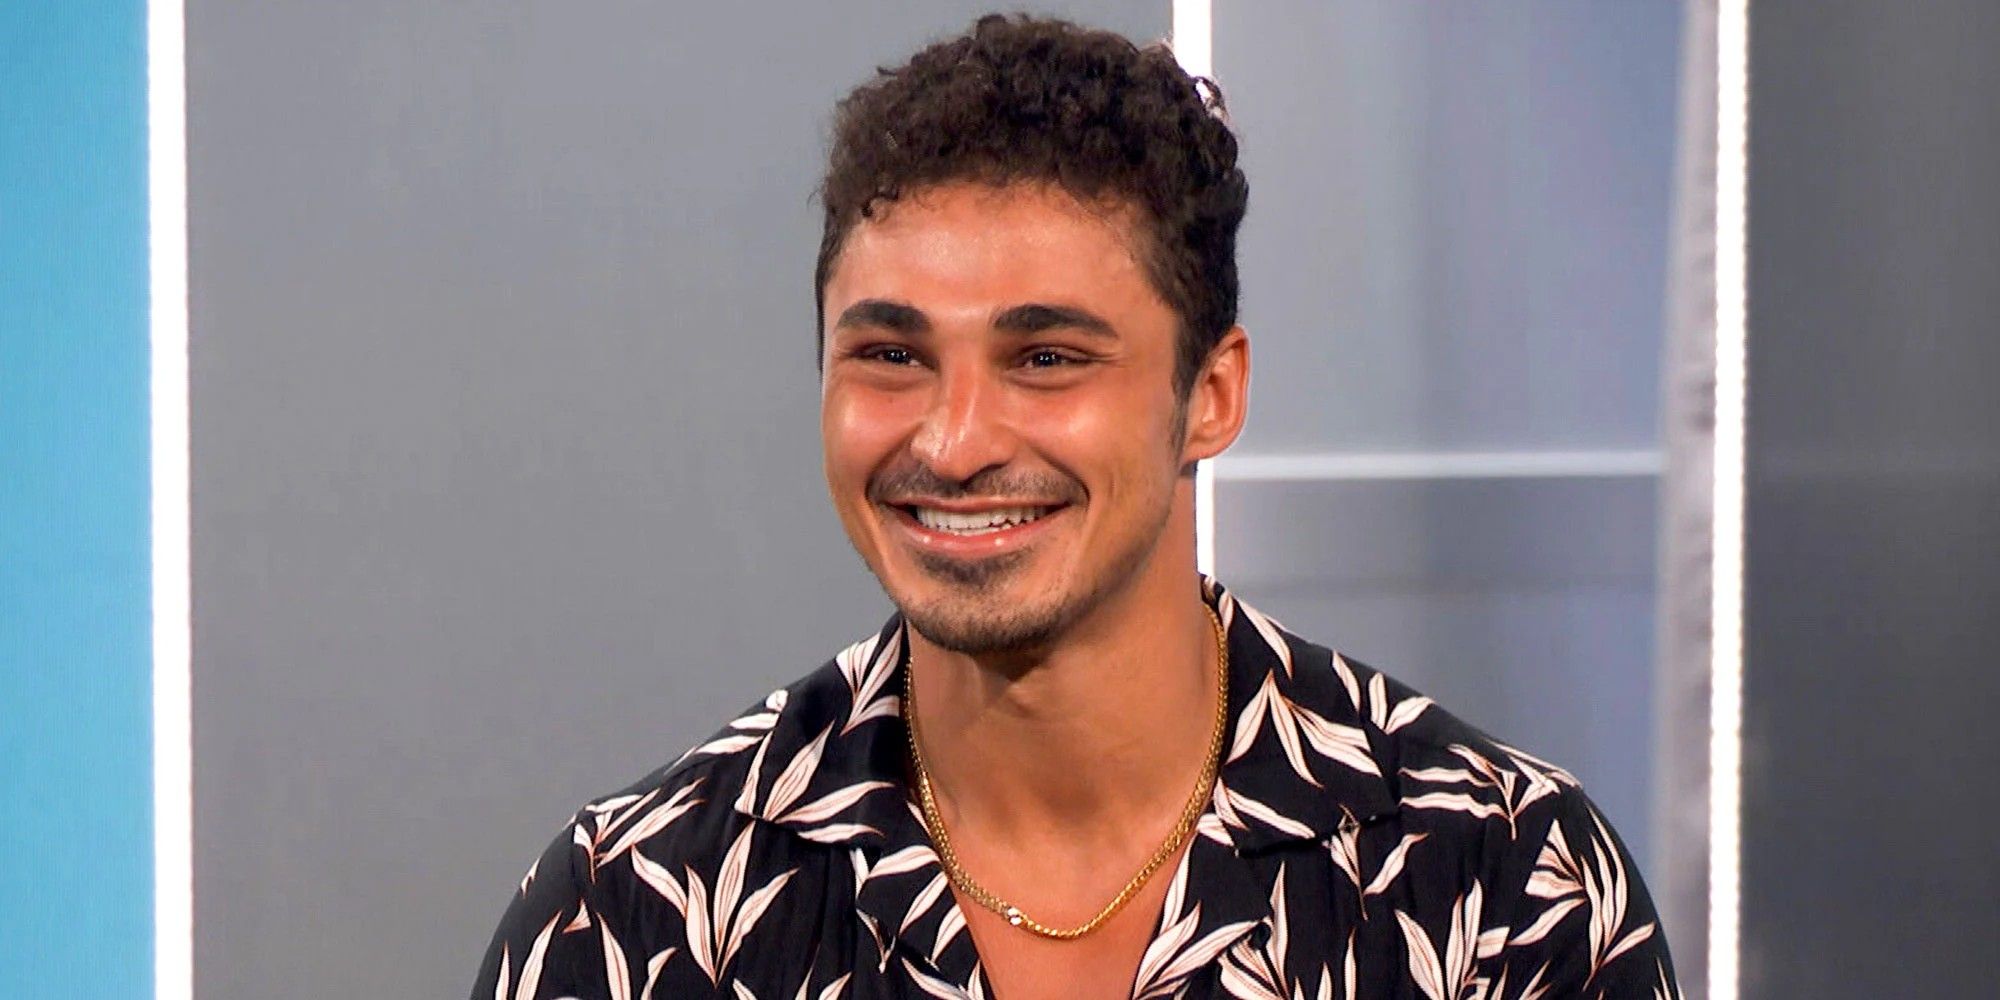 Joseph Abdin from Big Brother 24 smiling widely